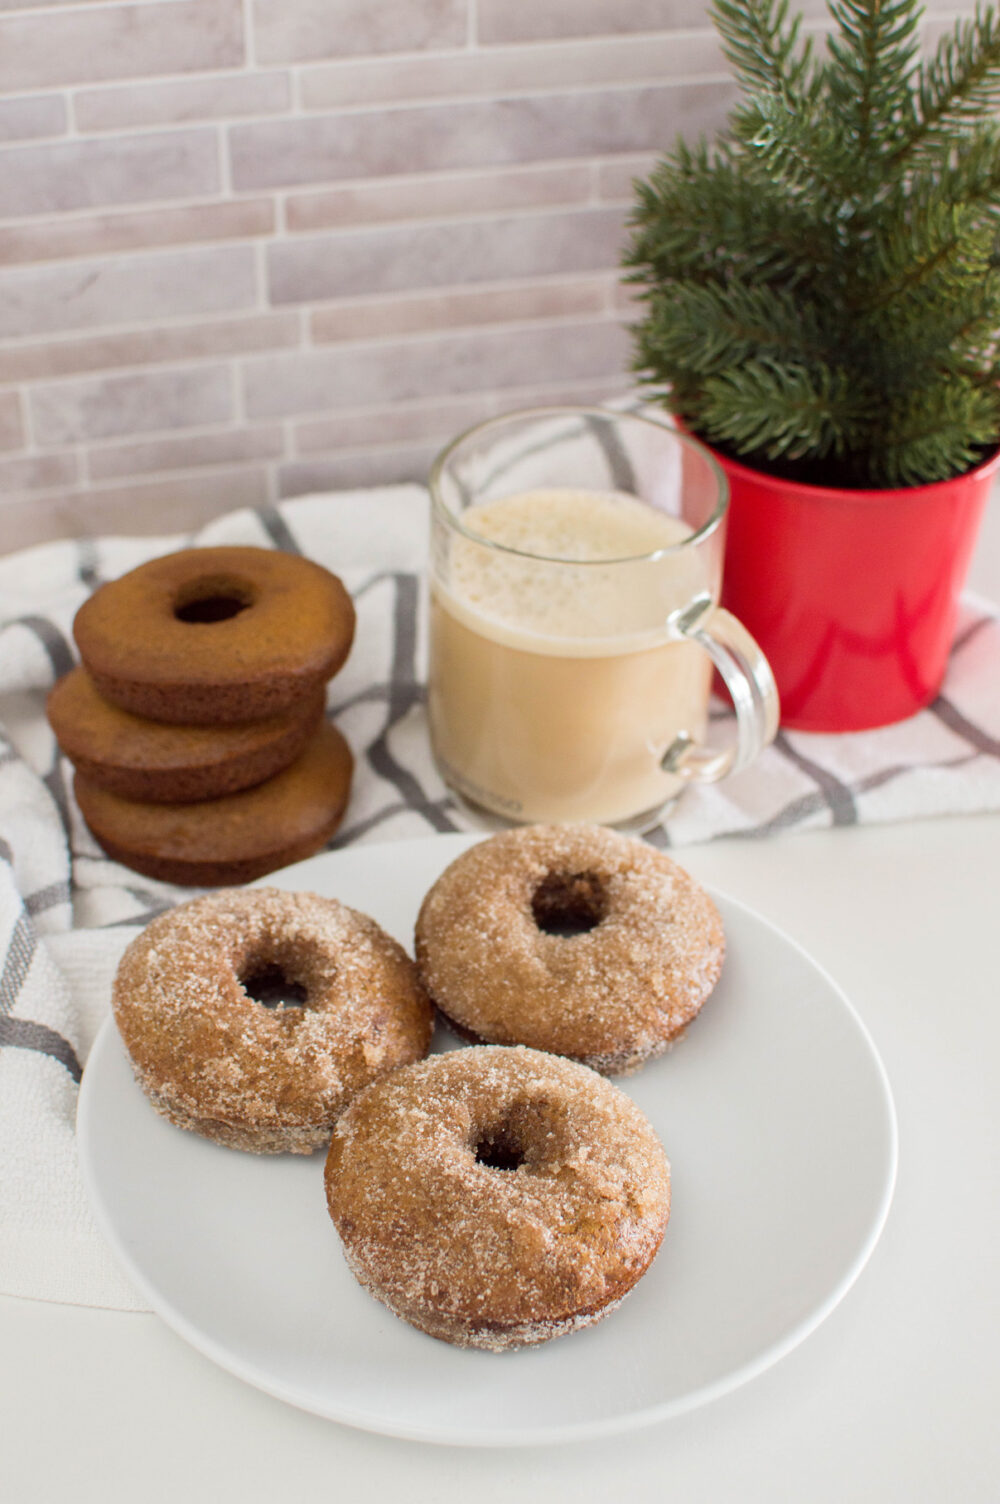 Cinnamon-sugar coated donuts on a white plate with more donuts in the background as well as a cup of coffee and a miniature Christmas tree.